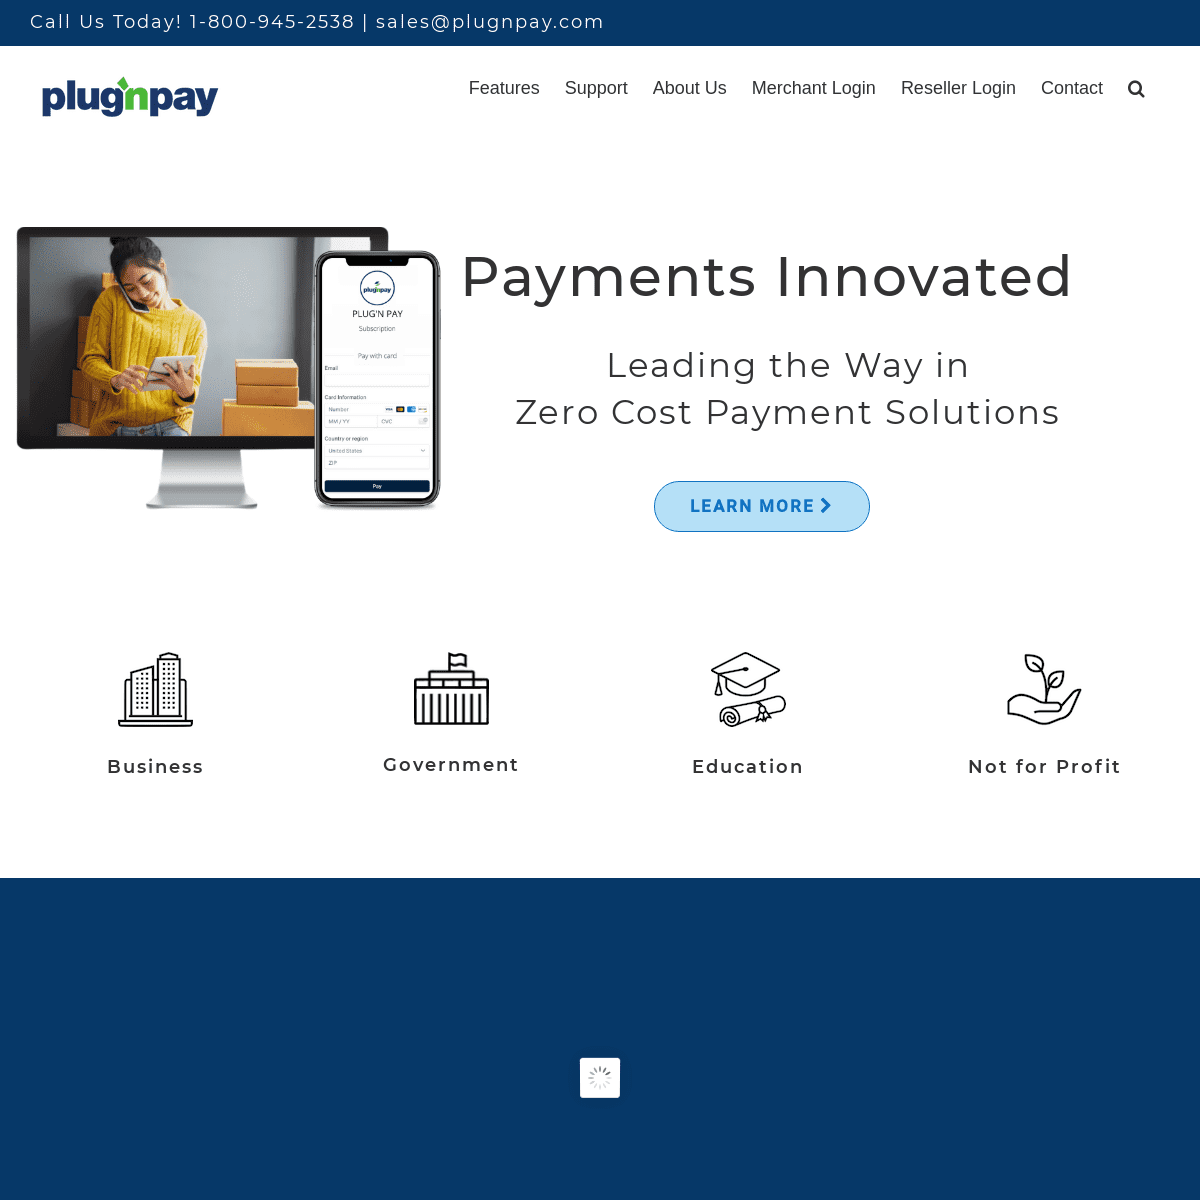 A complete backup of https://plugnpay.com